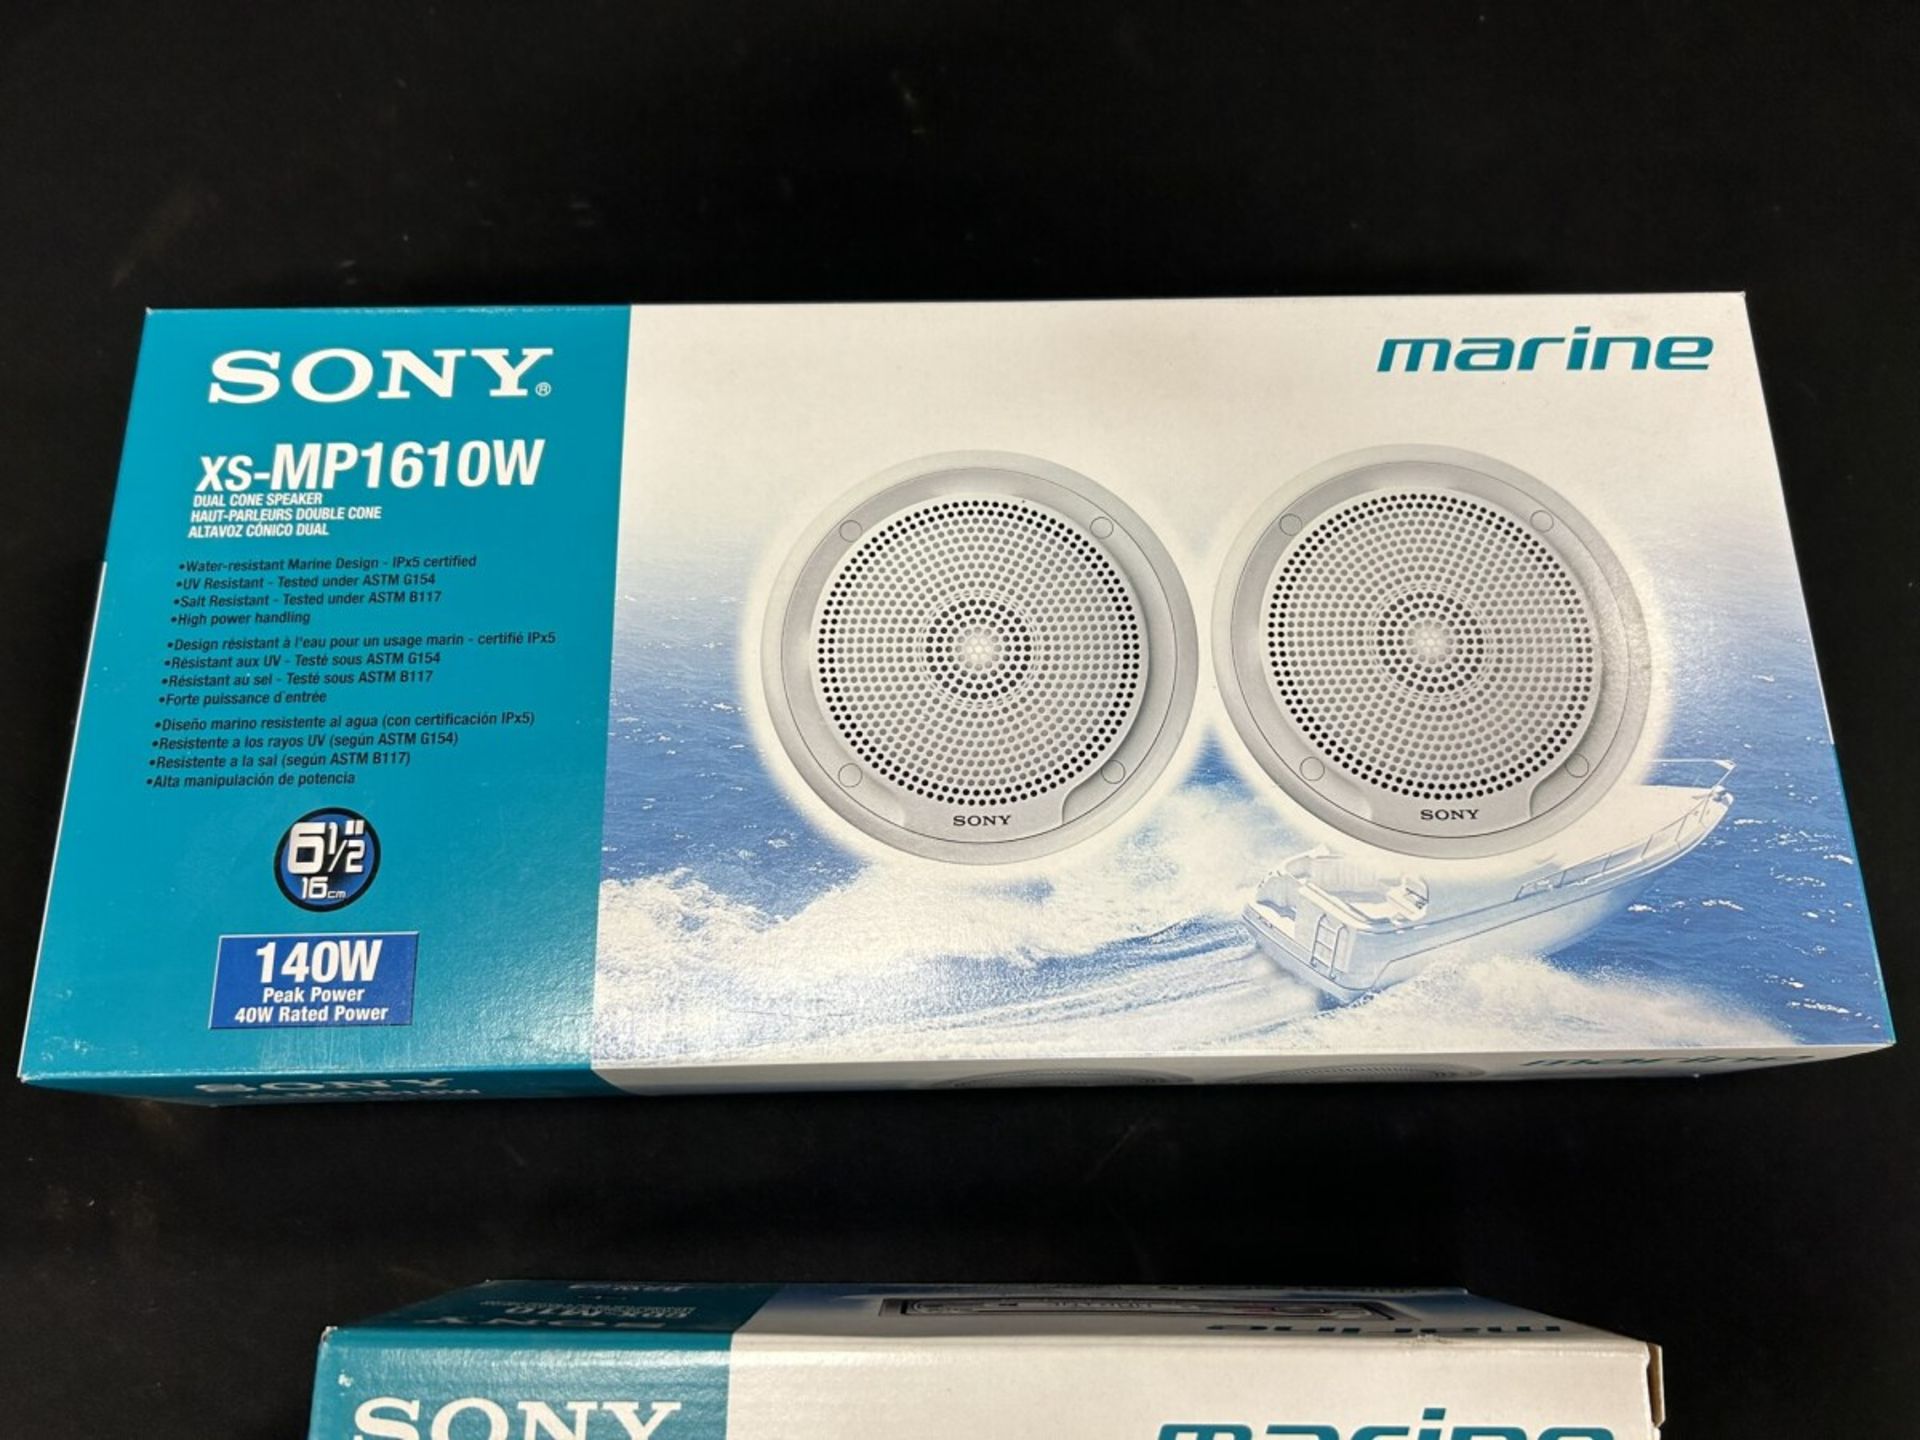 SONY MARINE COMPACT DISC PLAYER W/ 6-1/2 SPEAKERS - NEW IN BOX - Image 3 of 6